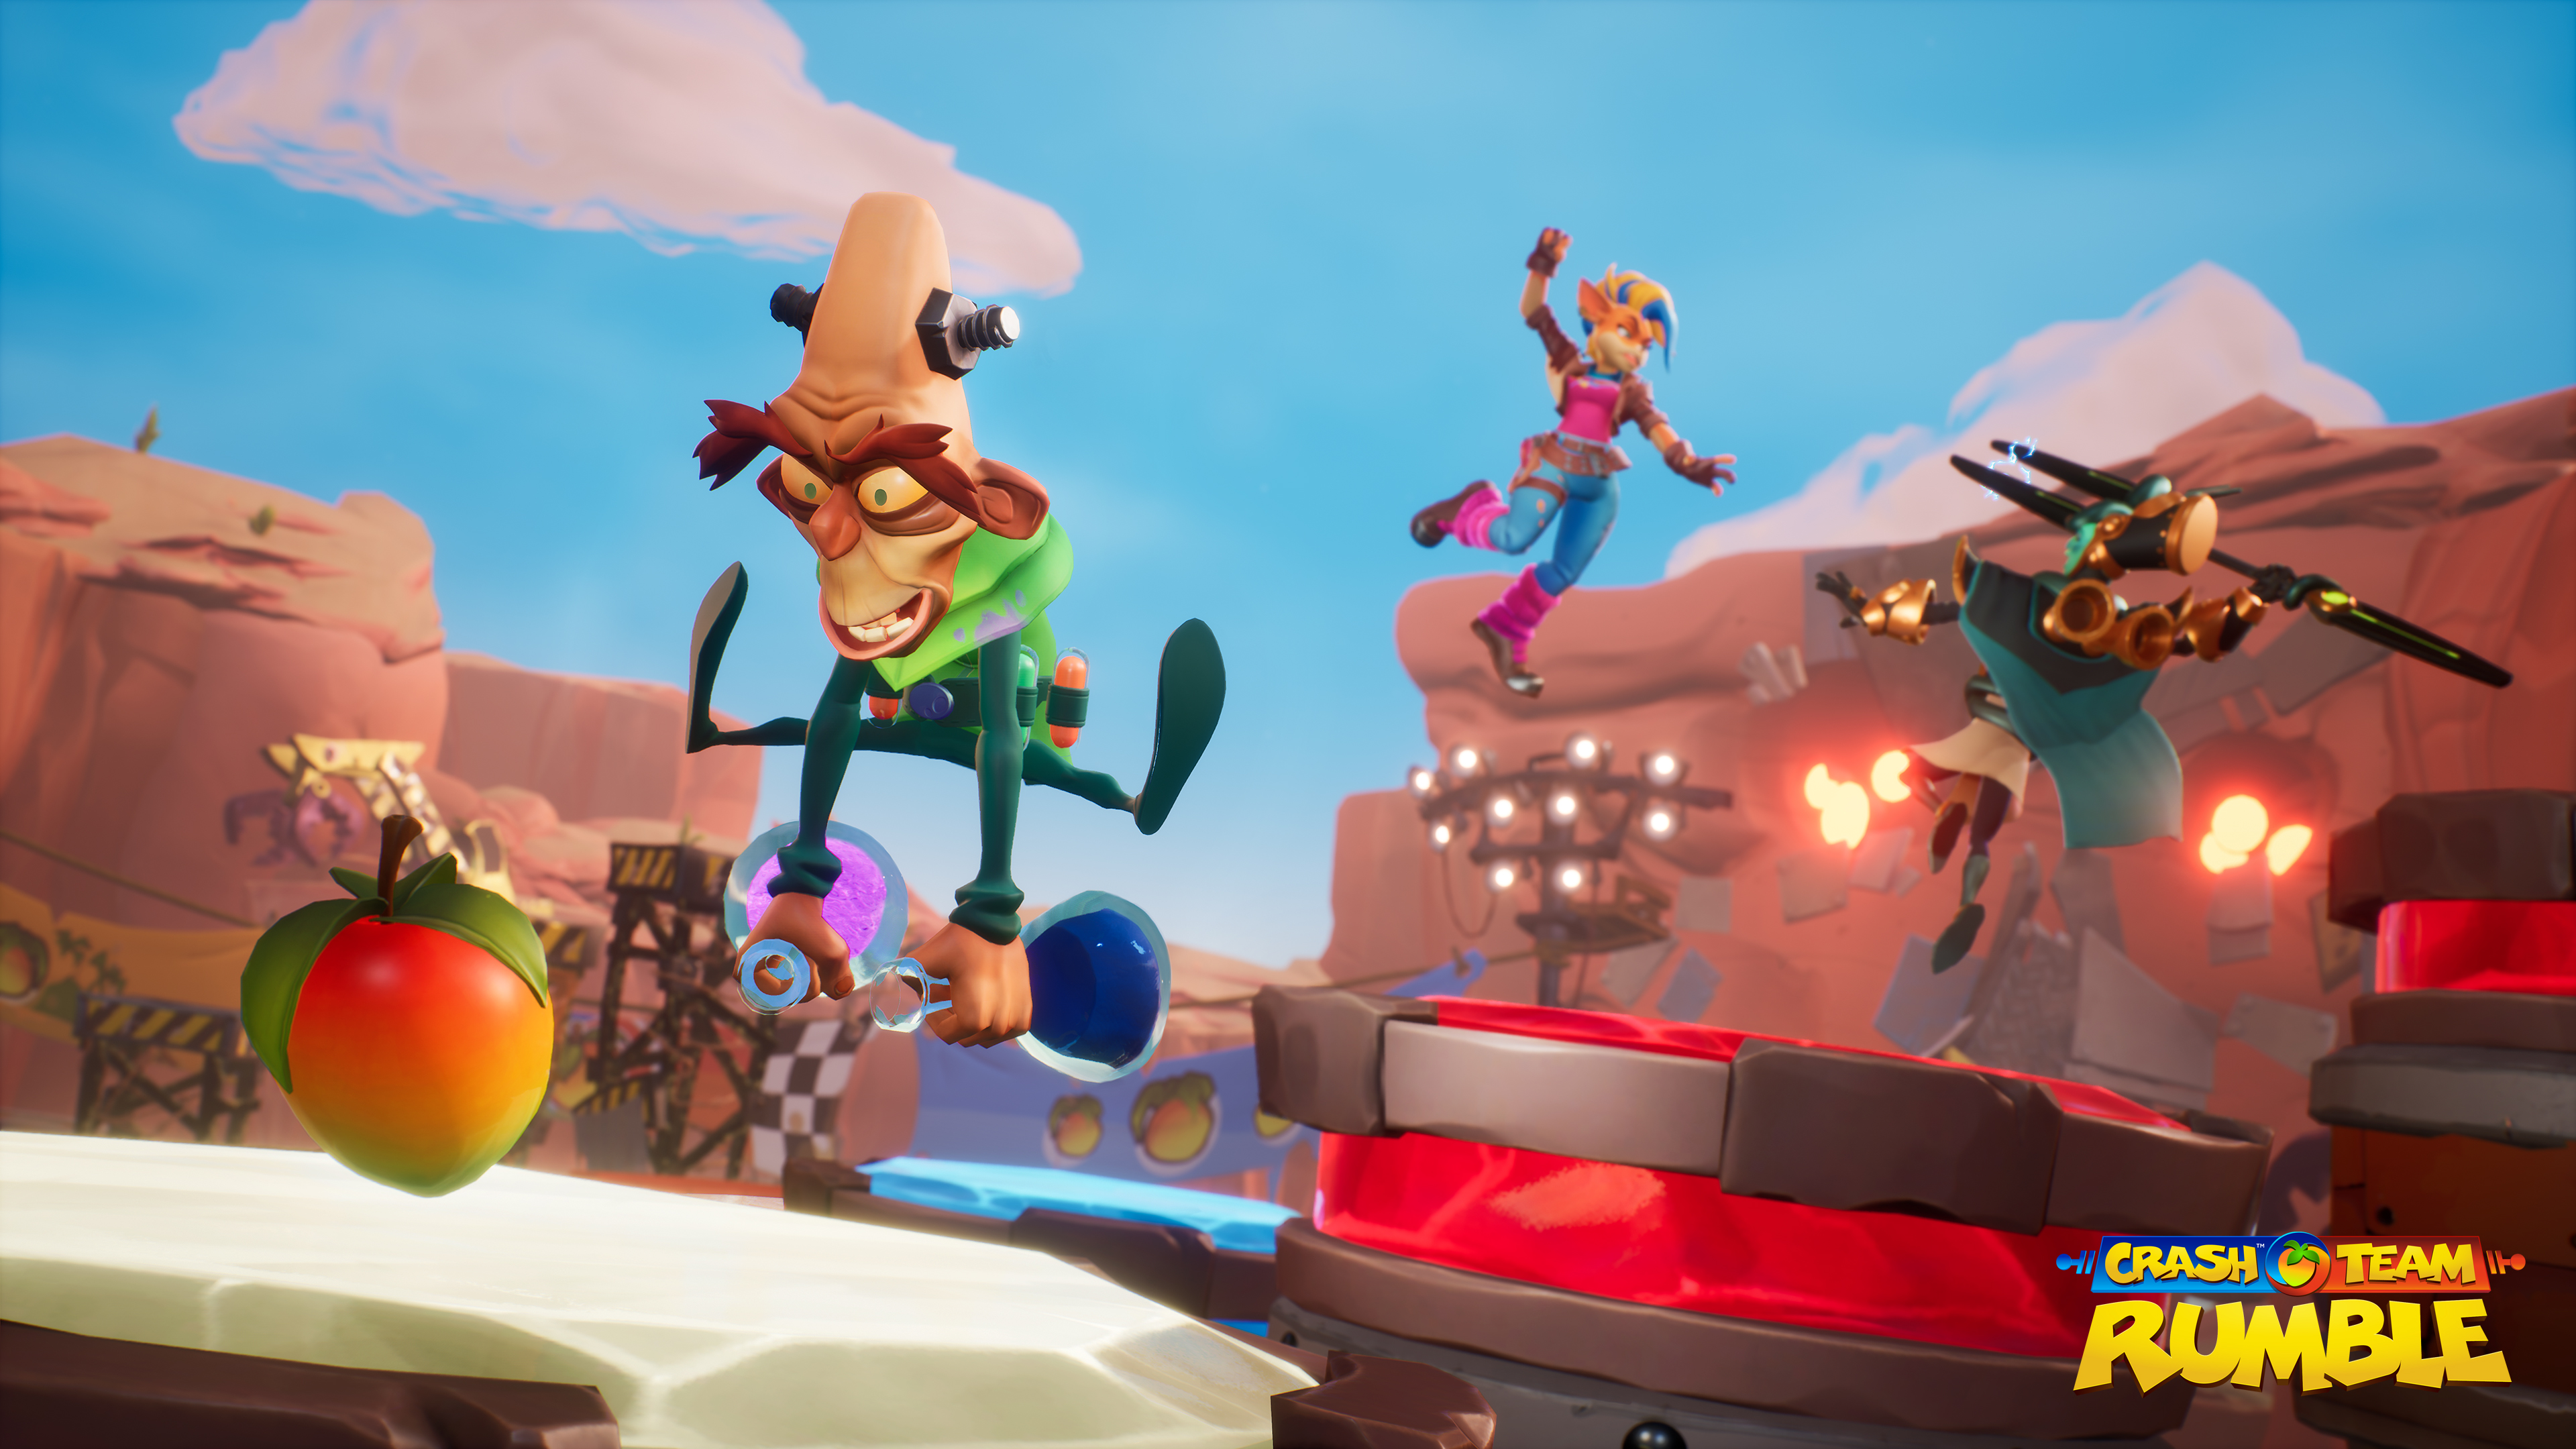 Crash Team Rumble beta: a promising premise that disappoints